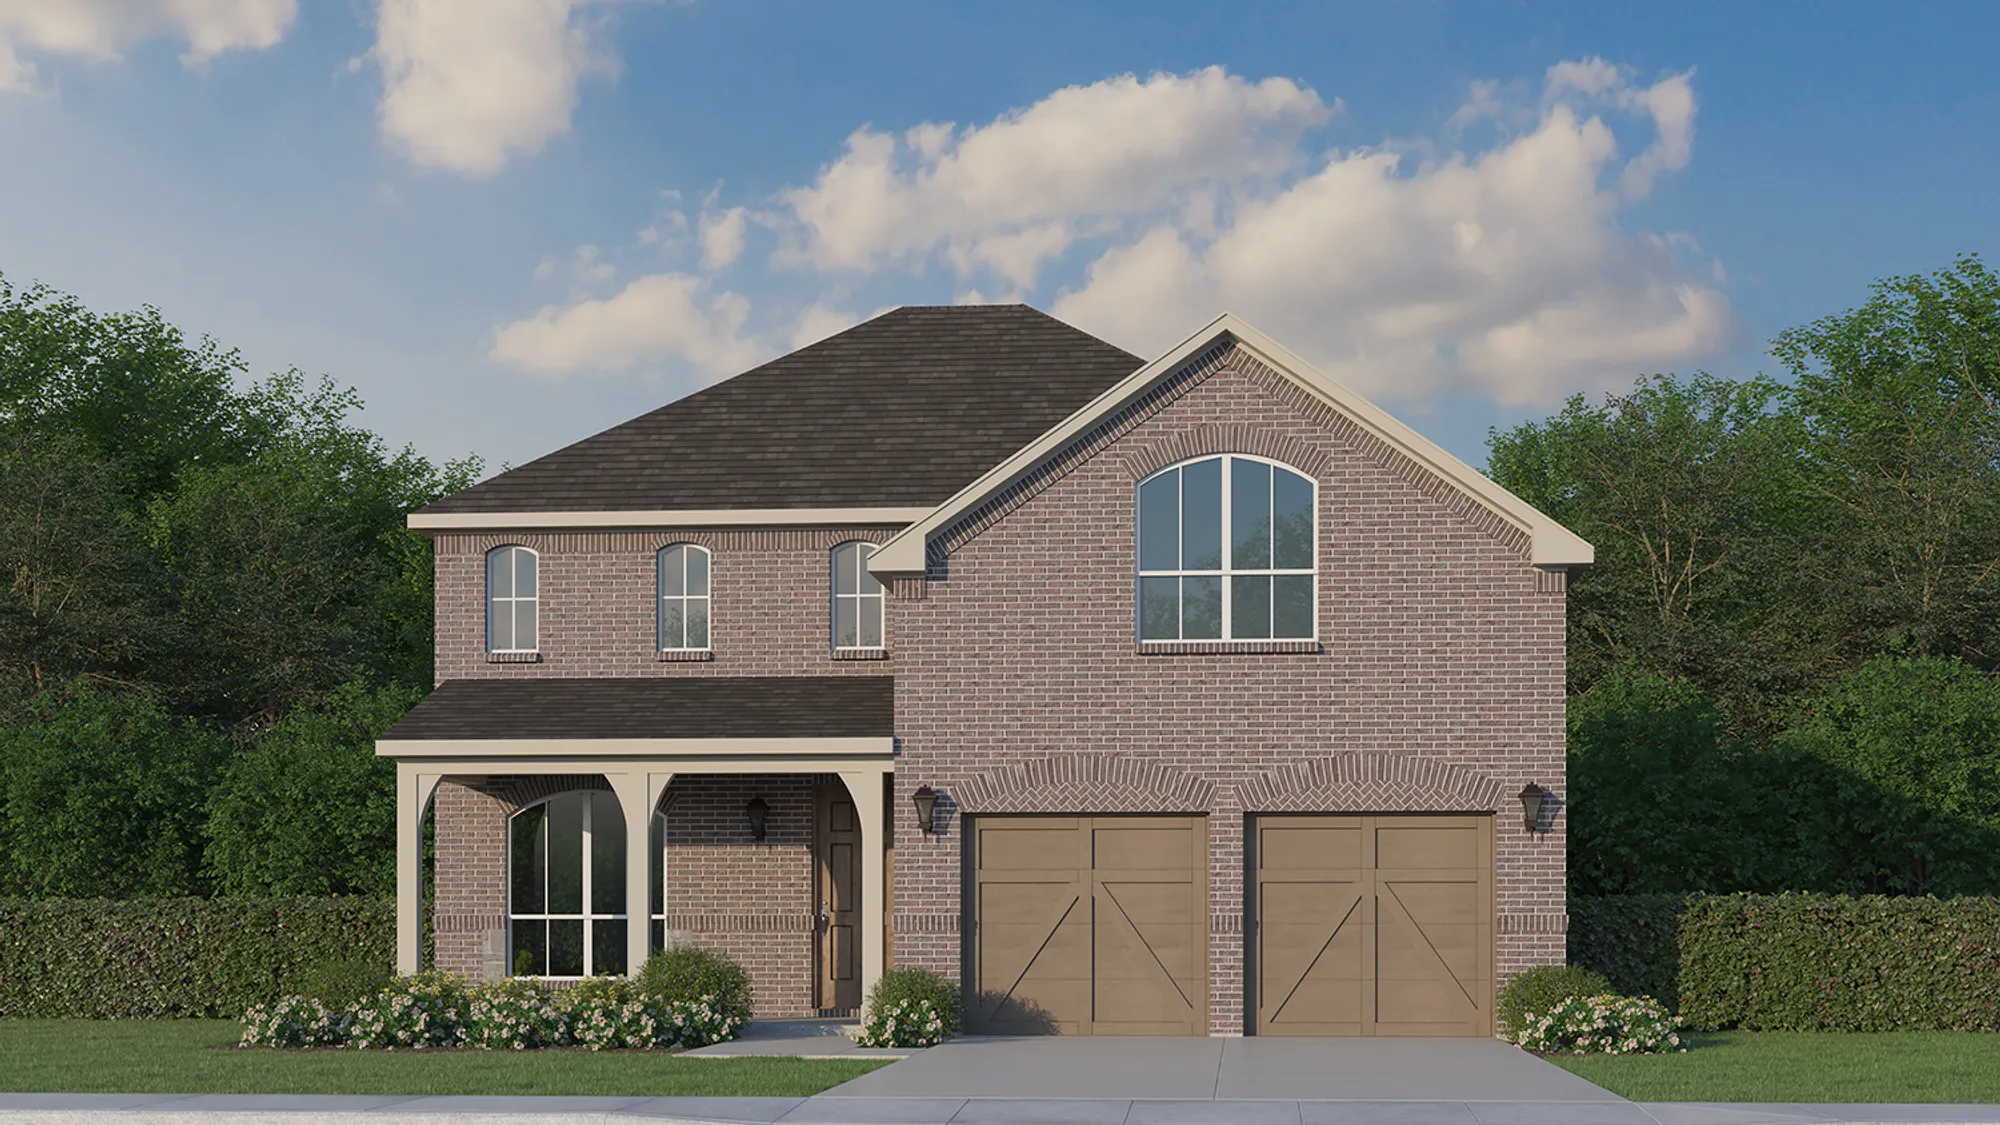 Plan 1542 Elevation A by American Legend Homes